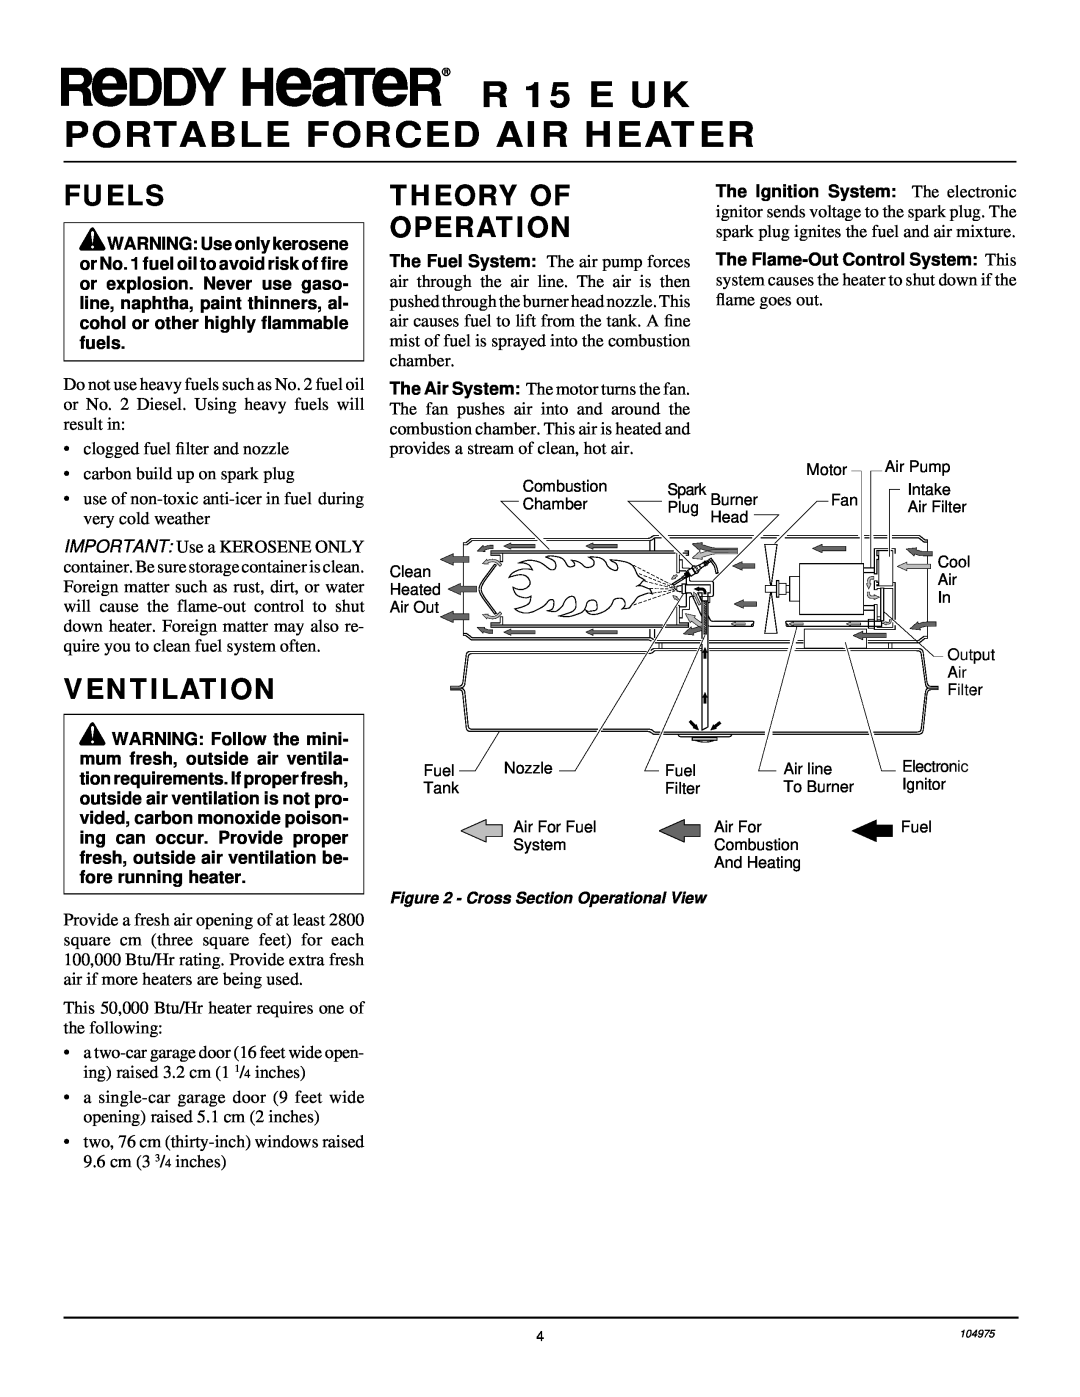 Desa owner manual Fuels, Theory Of Operation, Ventilation, R 15 E UK PORTABLE FORCED AIR HEATER 